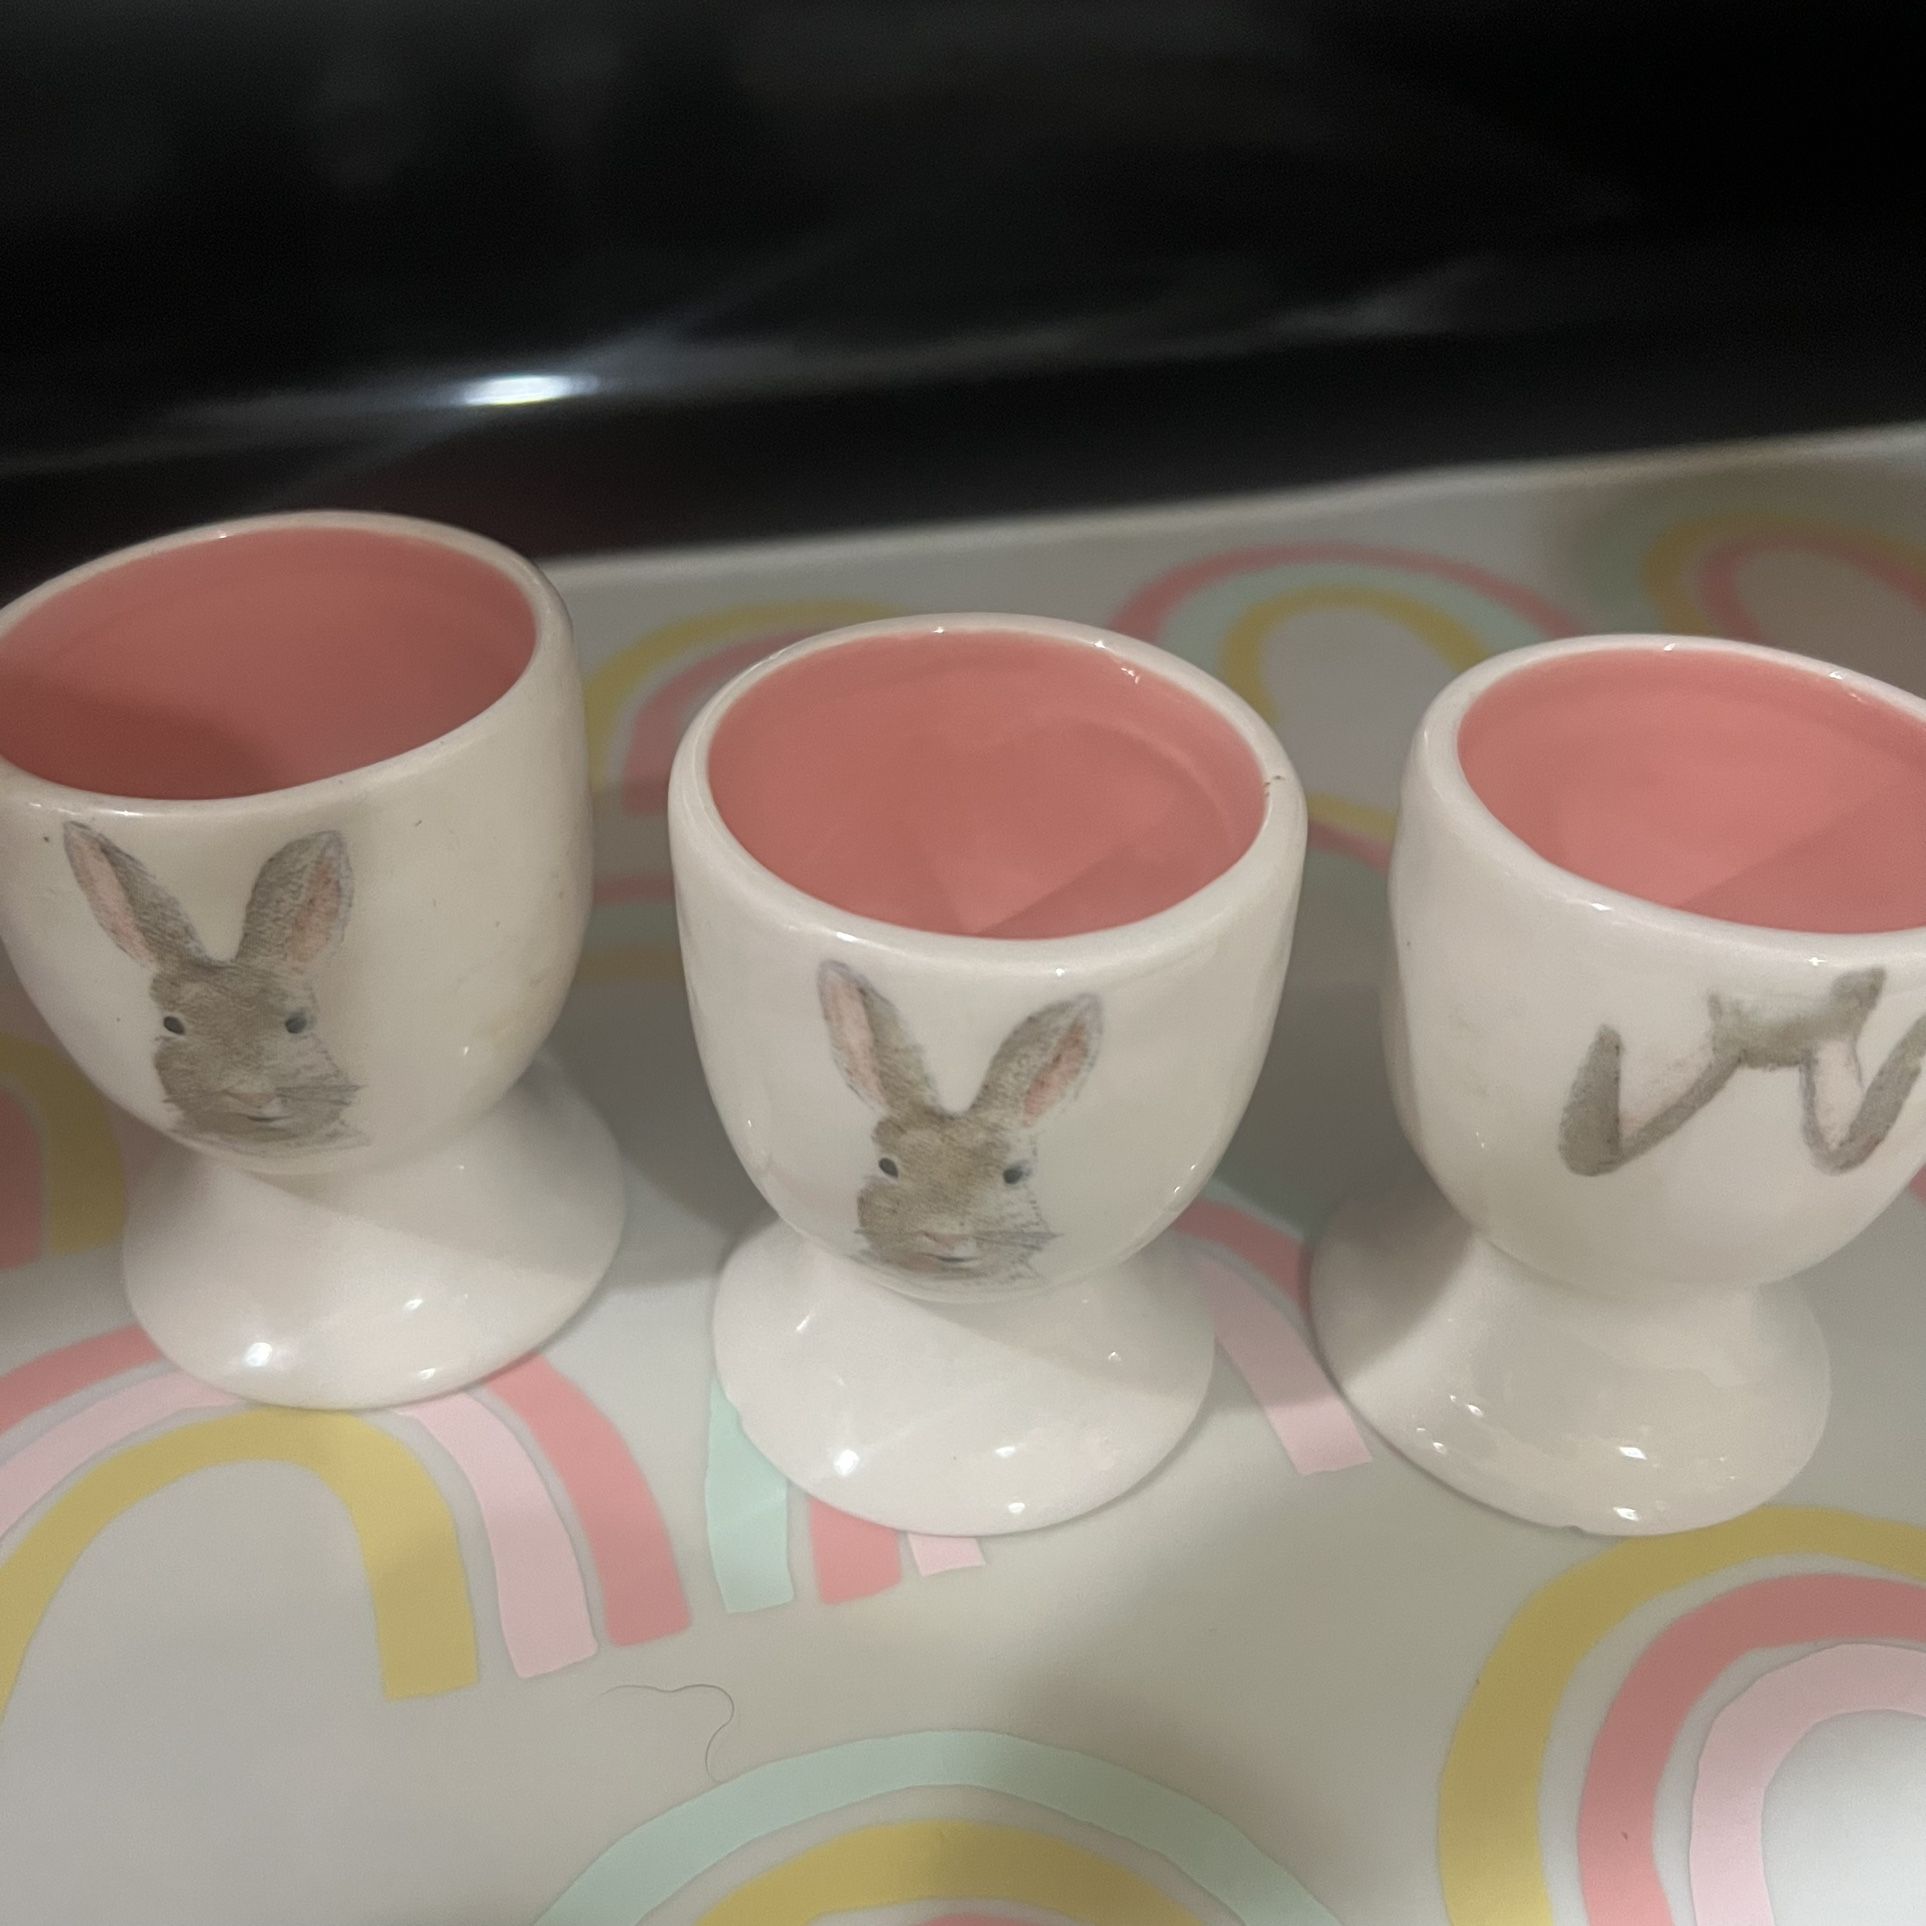 Rae Dunn Easter Egg Holders I Actually Have 4 